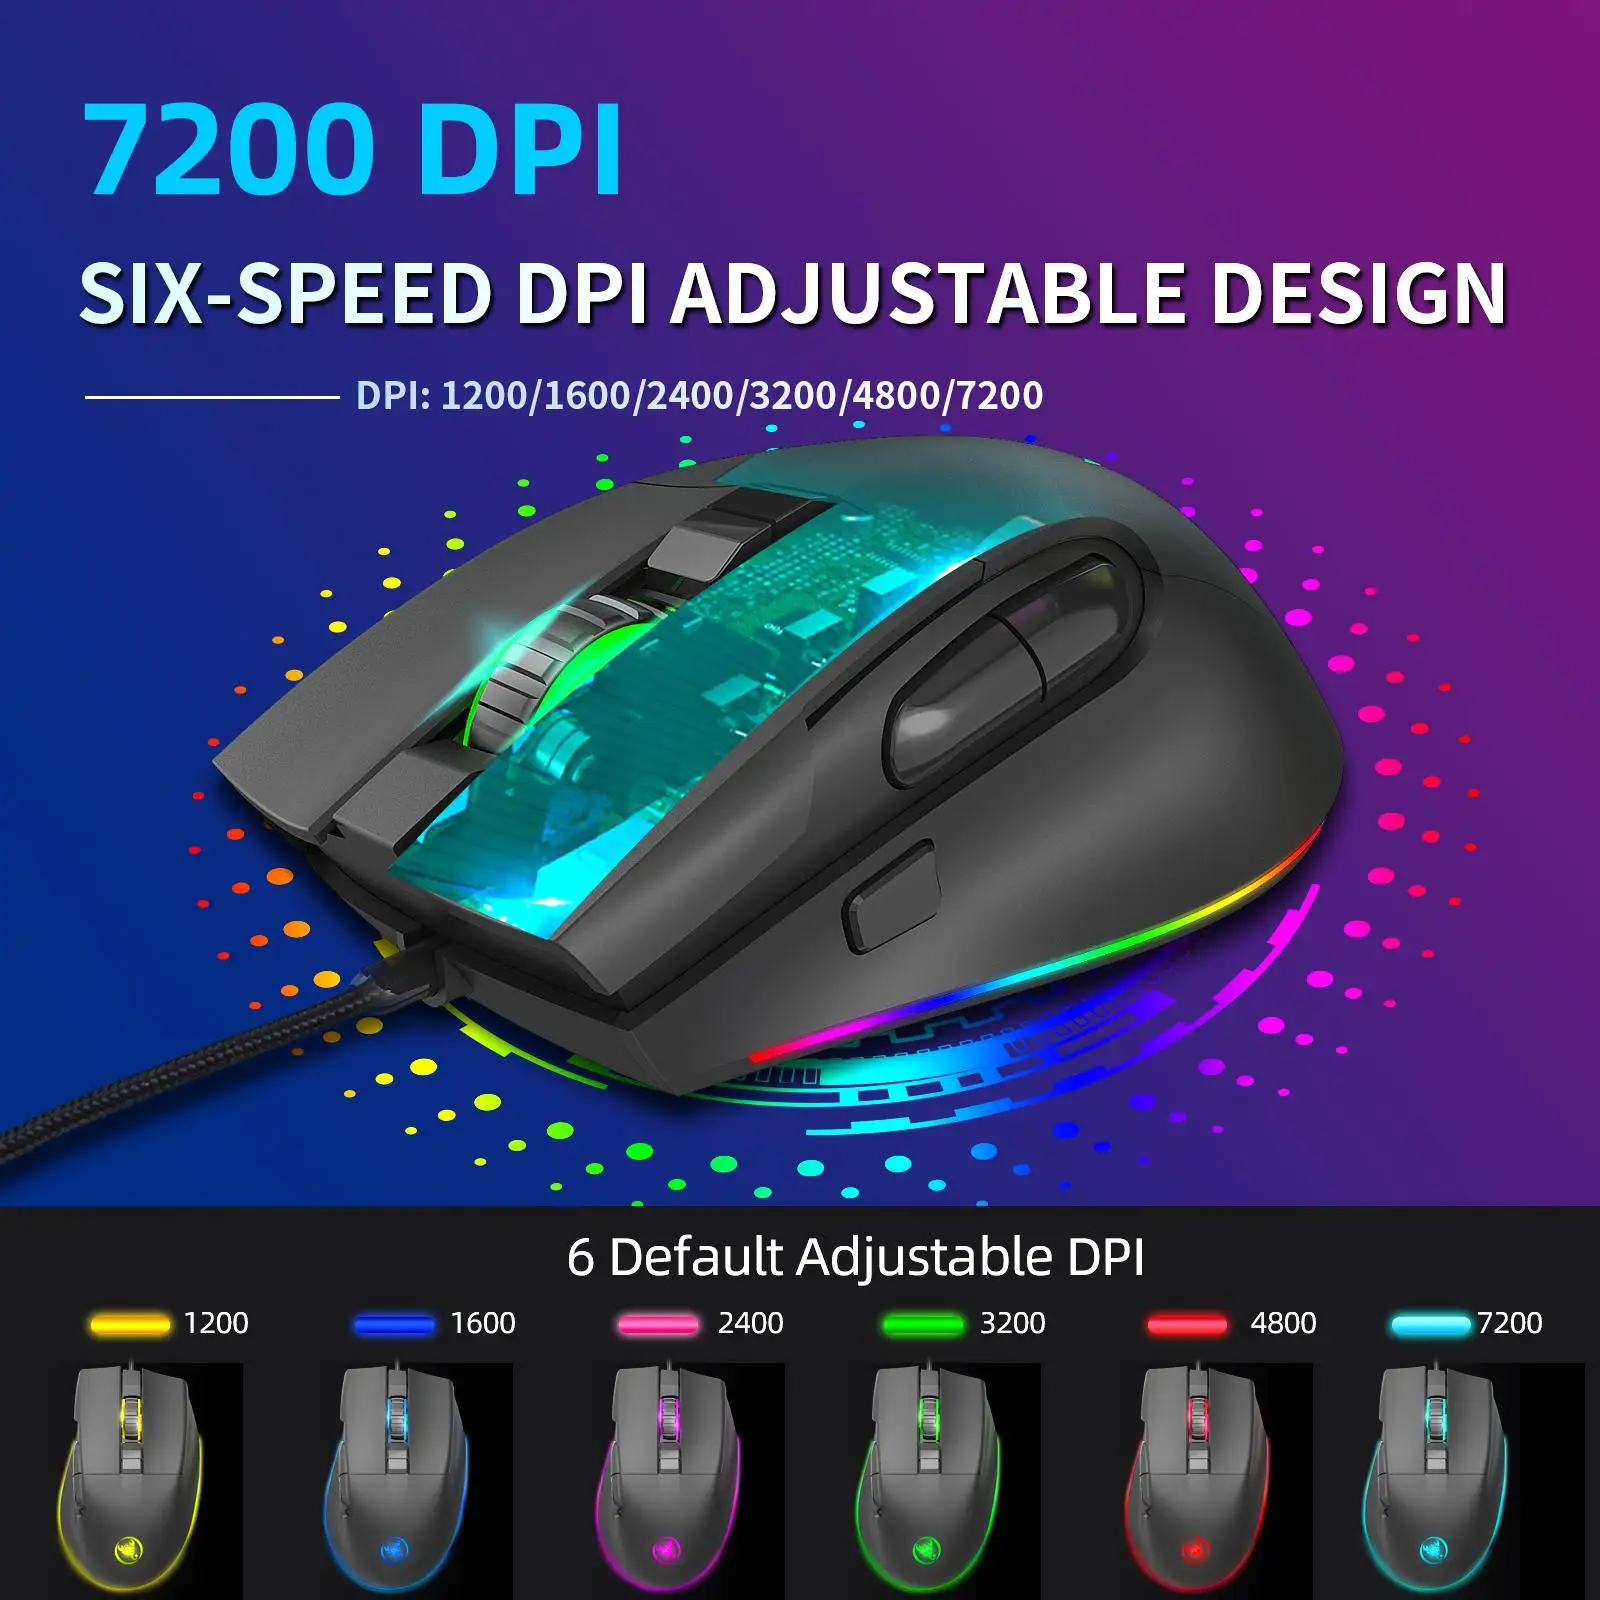 8D Wired Gaming Mouse Fire Button 13 RGB Lighting Modes Adjustable 7200 DPI Ergonomic 8 Buttons Computer Mice for Laptop Desktop